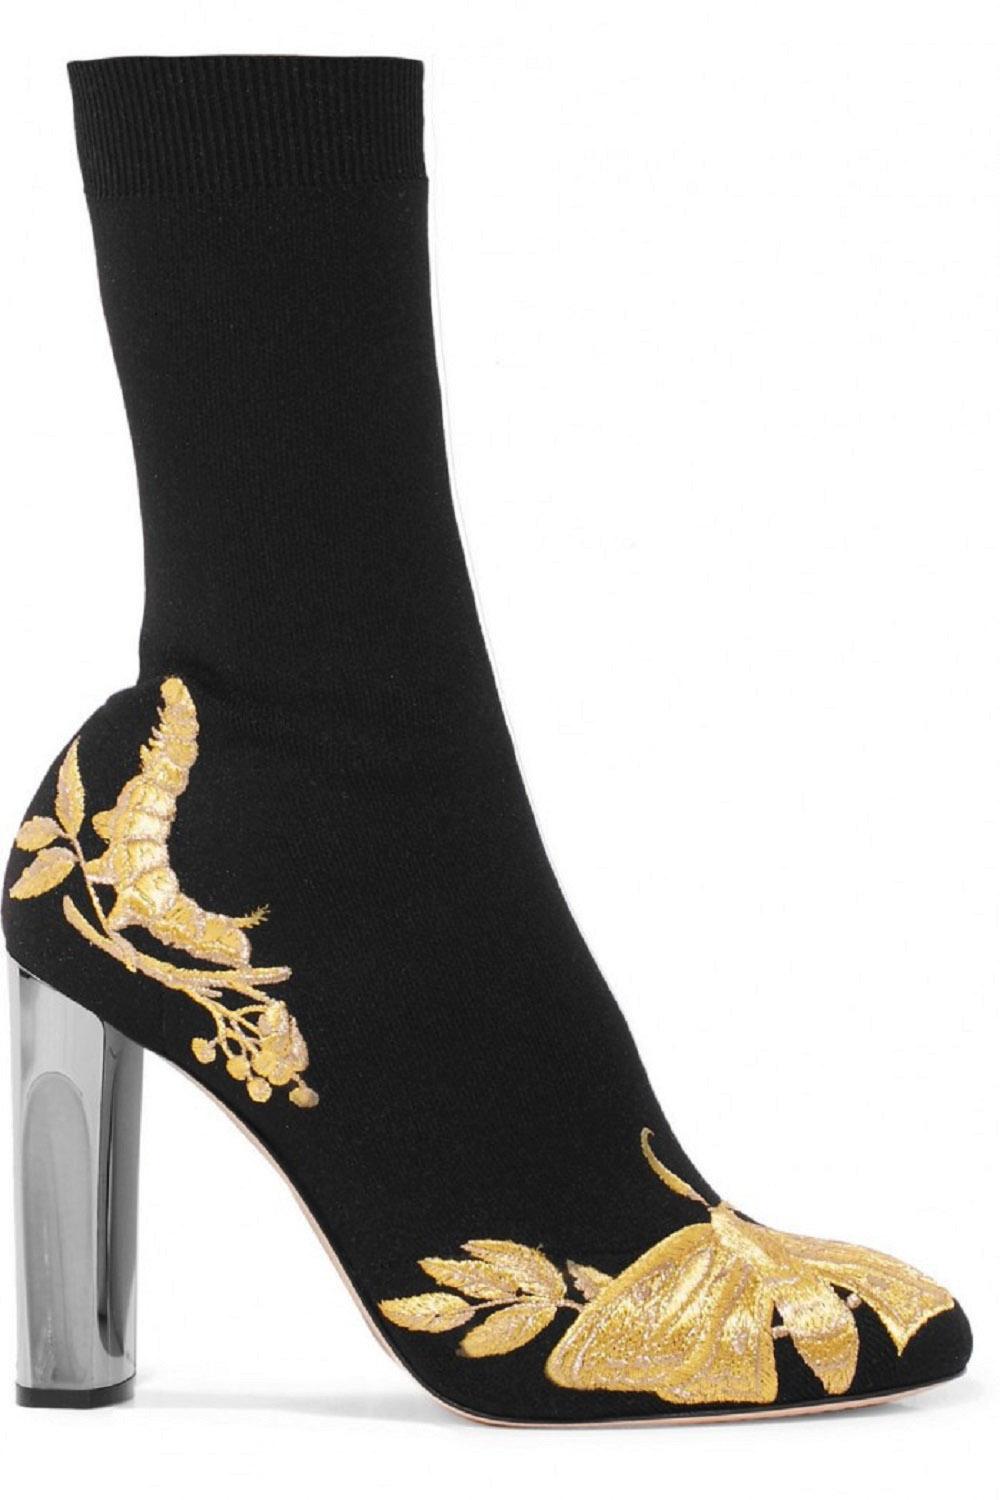 New Alexander McQueen AW 2018 Embroidered Black Gold Ankle Stretch-Knit ...